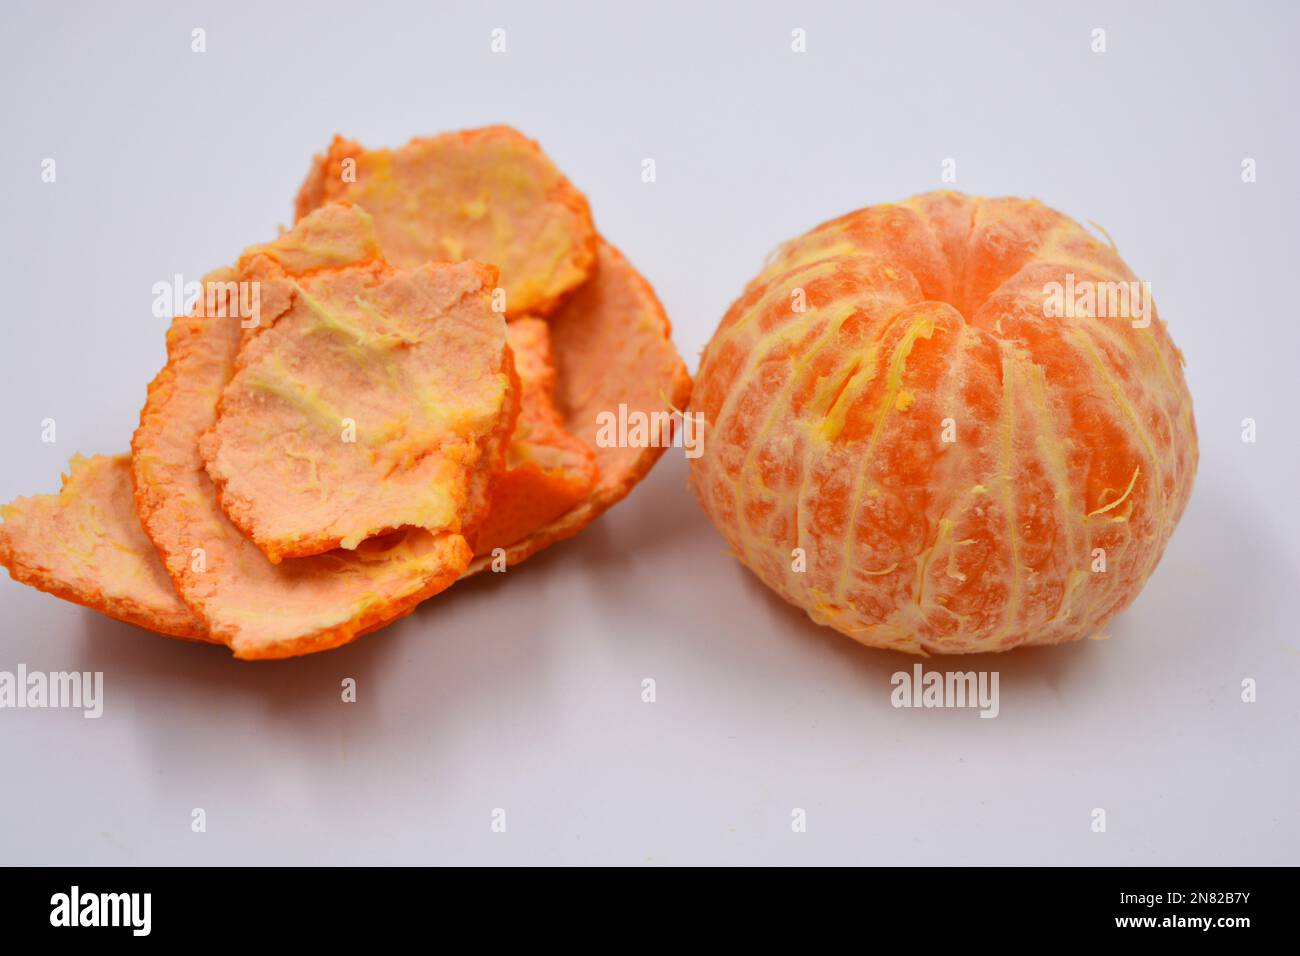 Ripe peeled orange tangerine, sweet fruit with orange skin located on a white background in different positions. Stock Photo